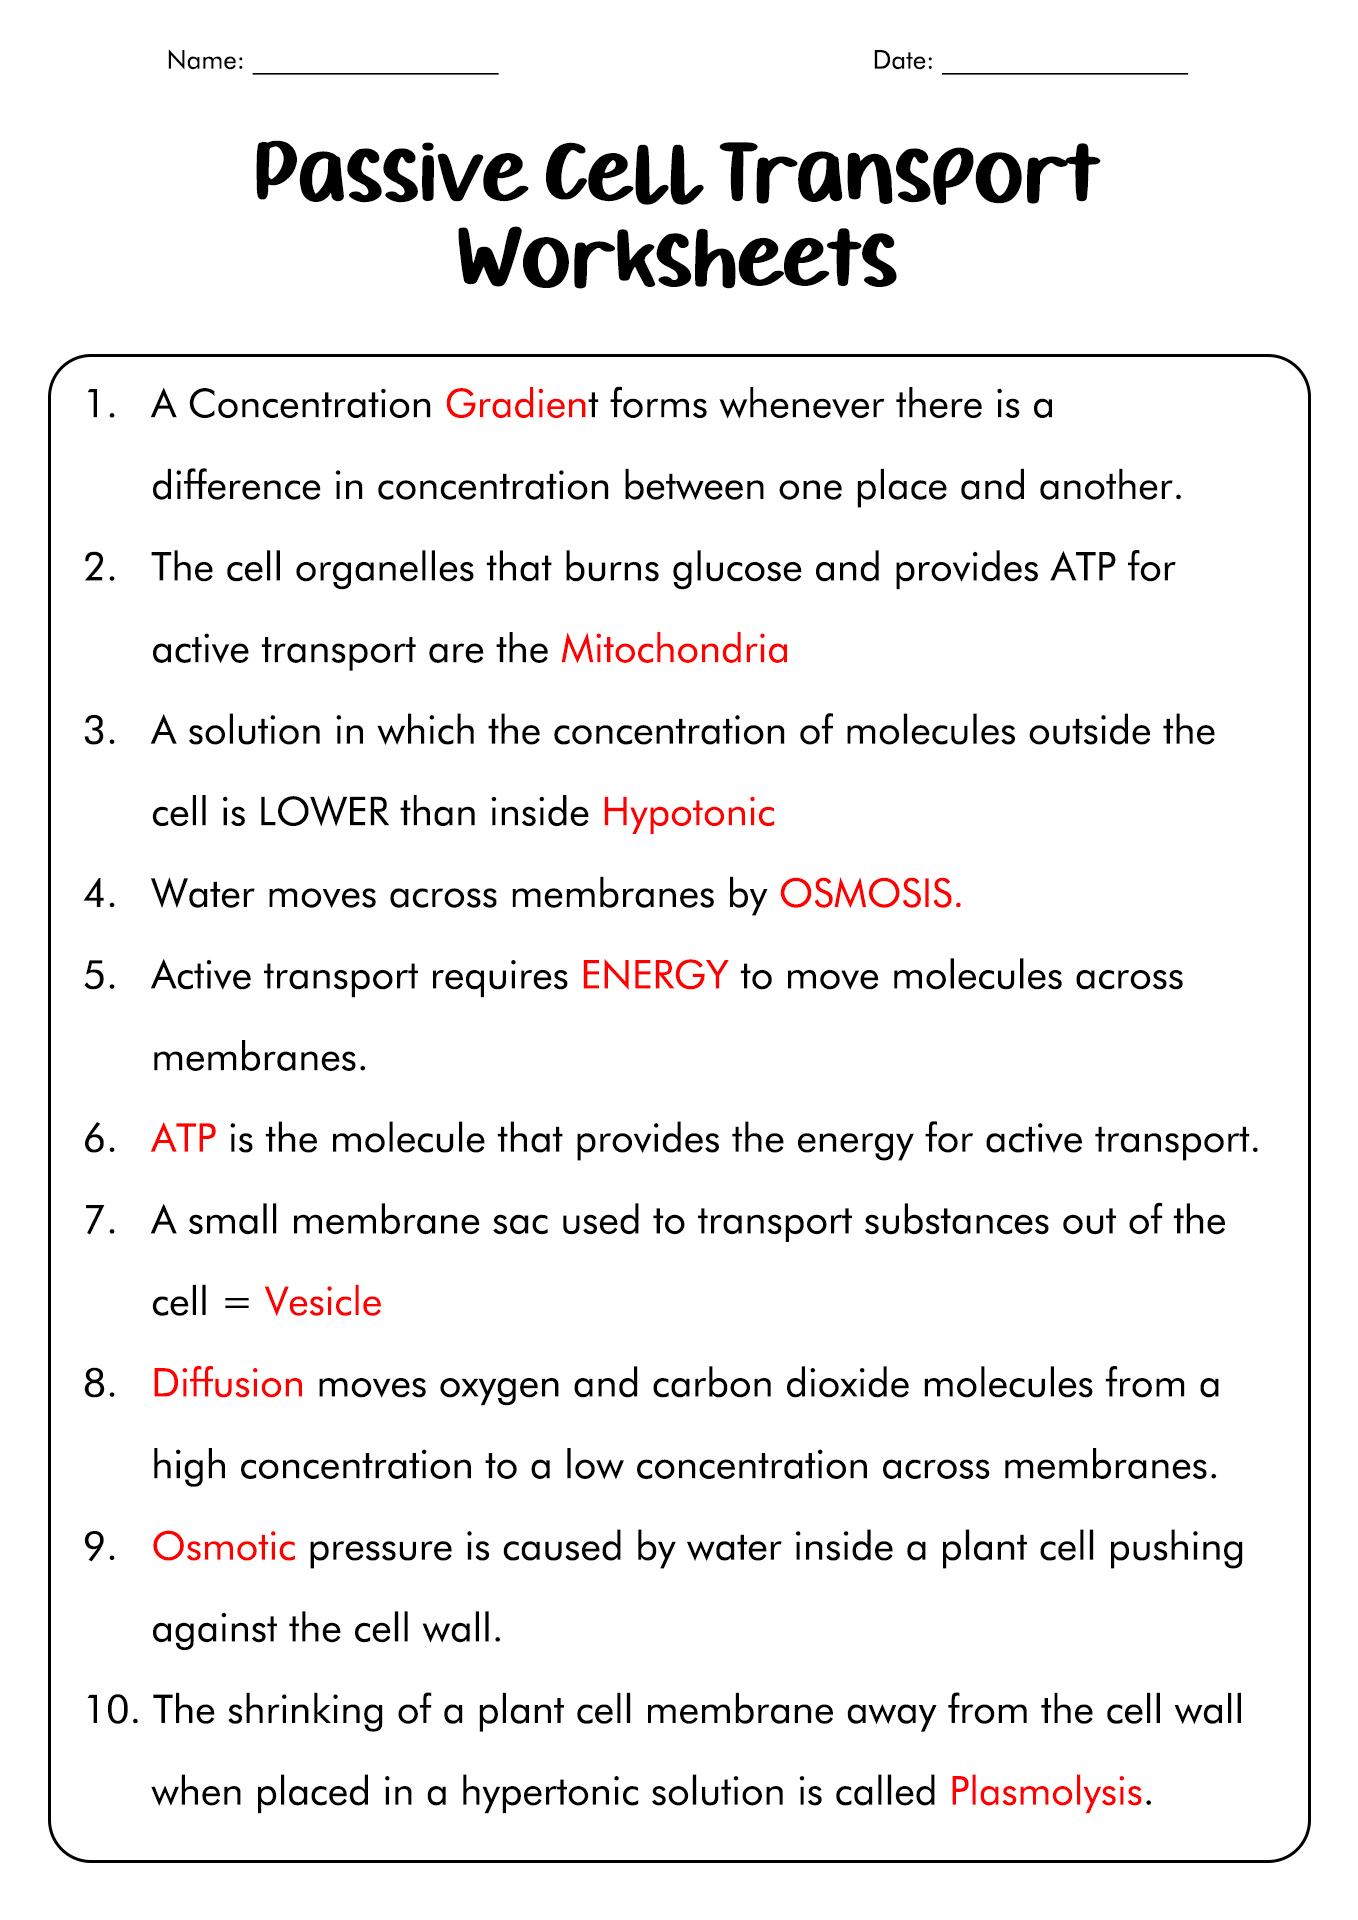 Passive Cell Transport Worksheet Answers Image